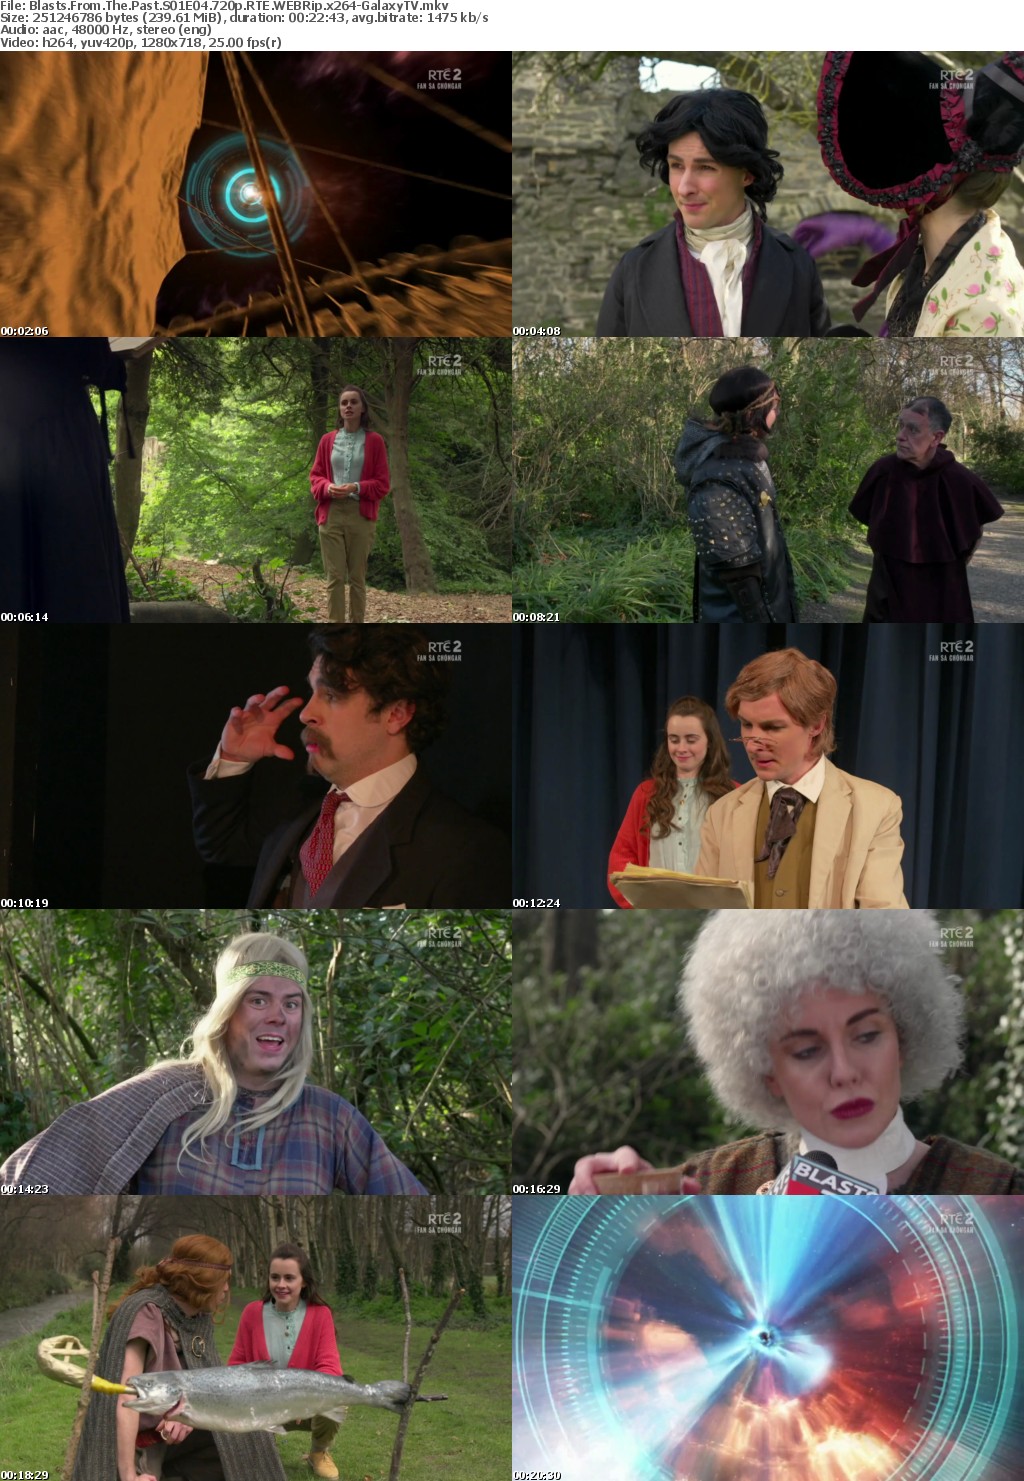 Blasts From The Past S01 COMPLETE 720p RTE WEBRip x264-GalaxyTV